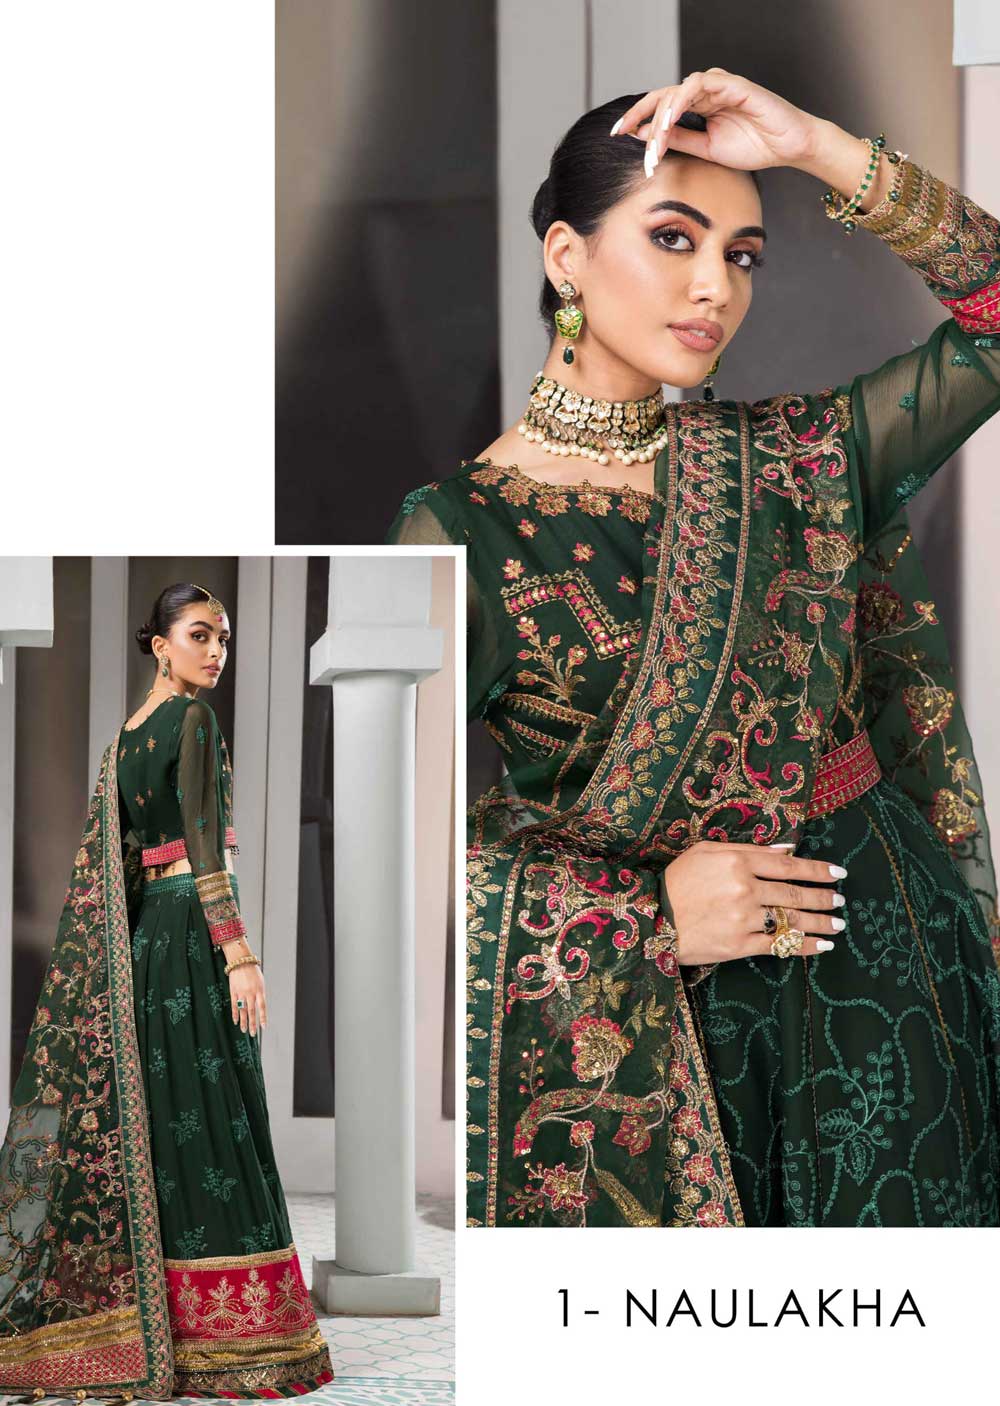 01 - Naulakha - Unstitched - Vasl-e-Meraas Collection by Alizeh 2022 - Memsaab Online